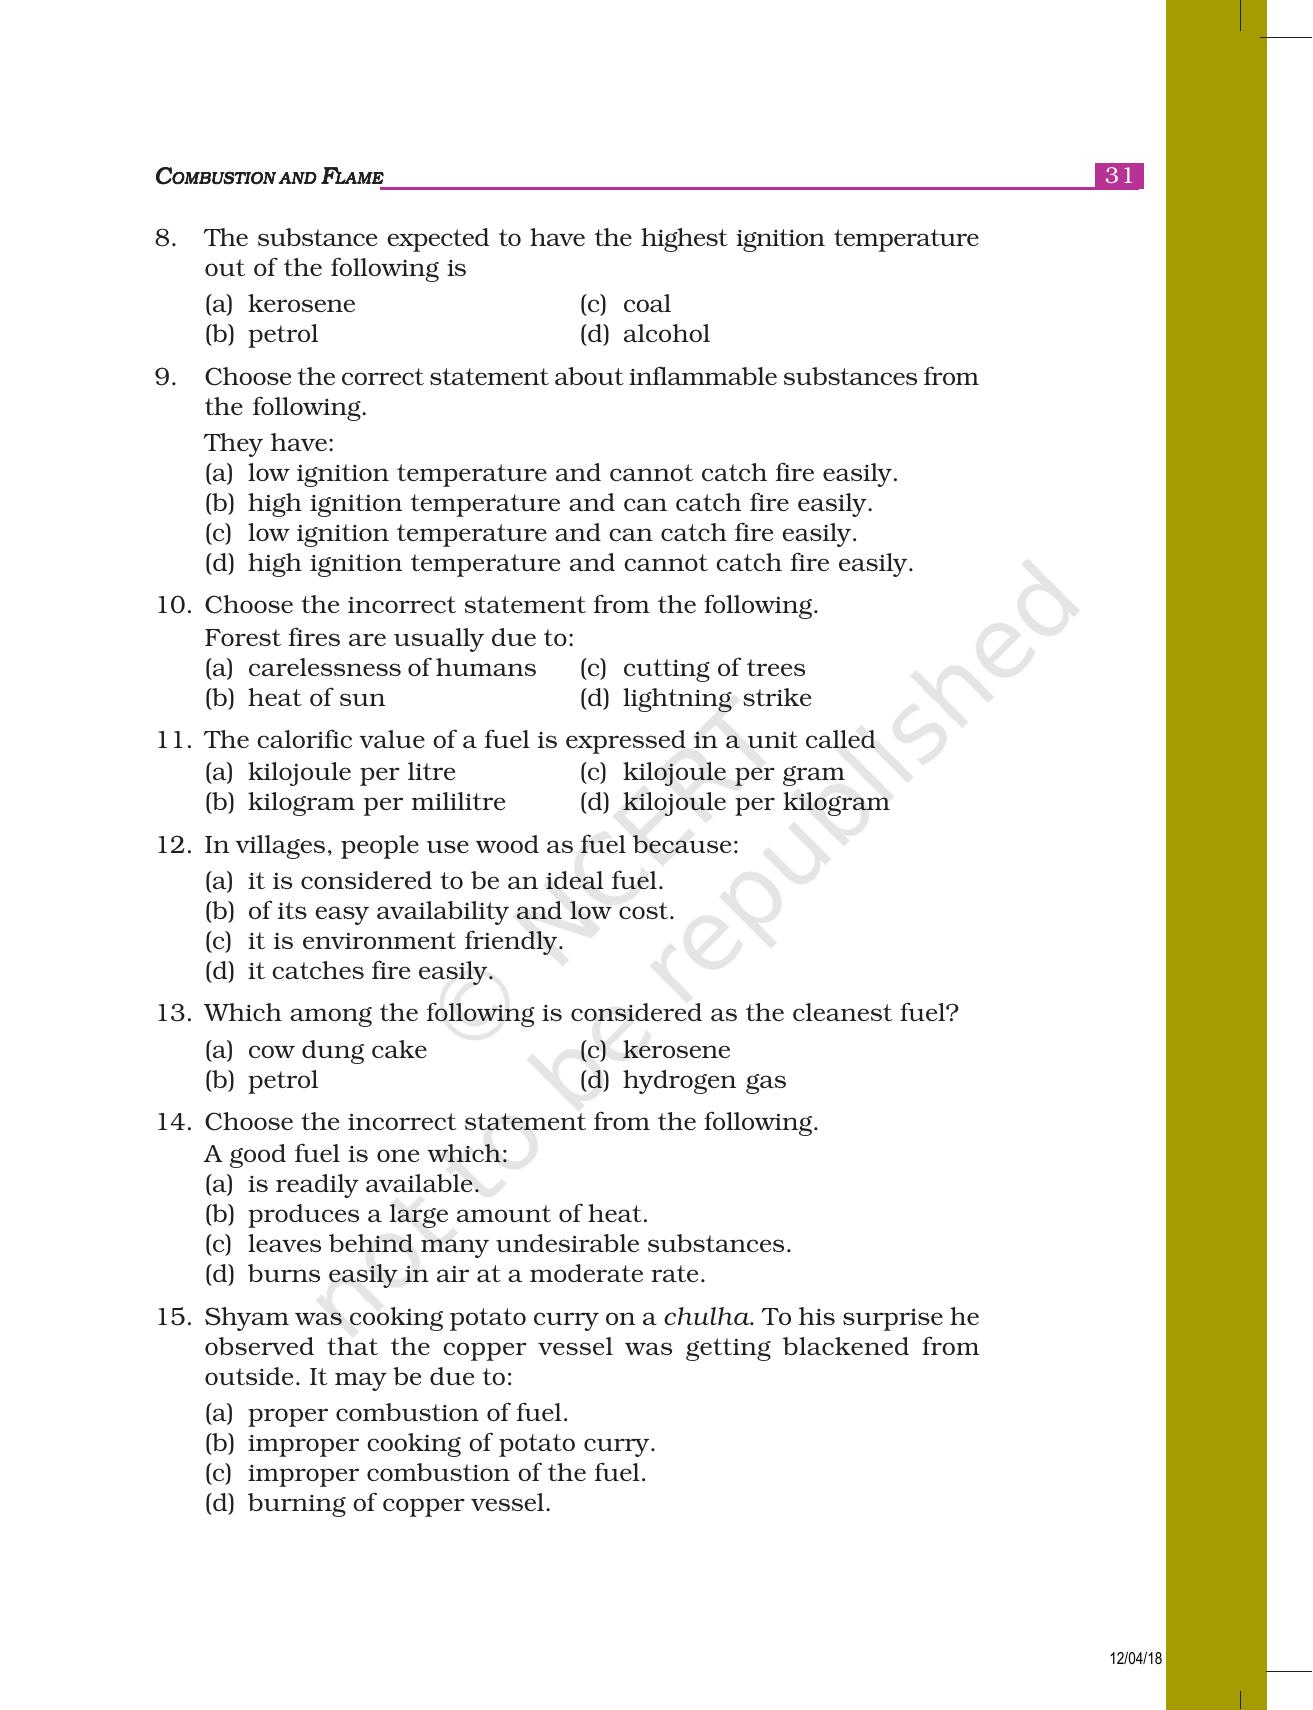 NCERT Exemplar Book for Class 8 Science: Chapter 6- Combustion and Flame - Page 2